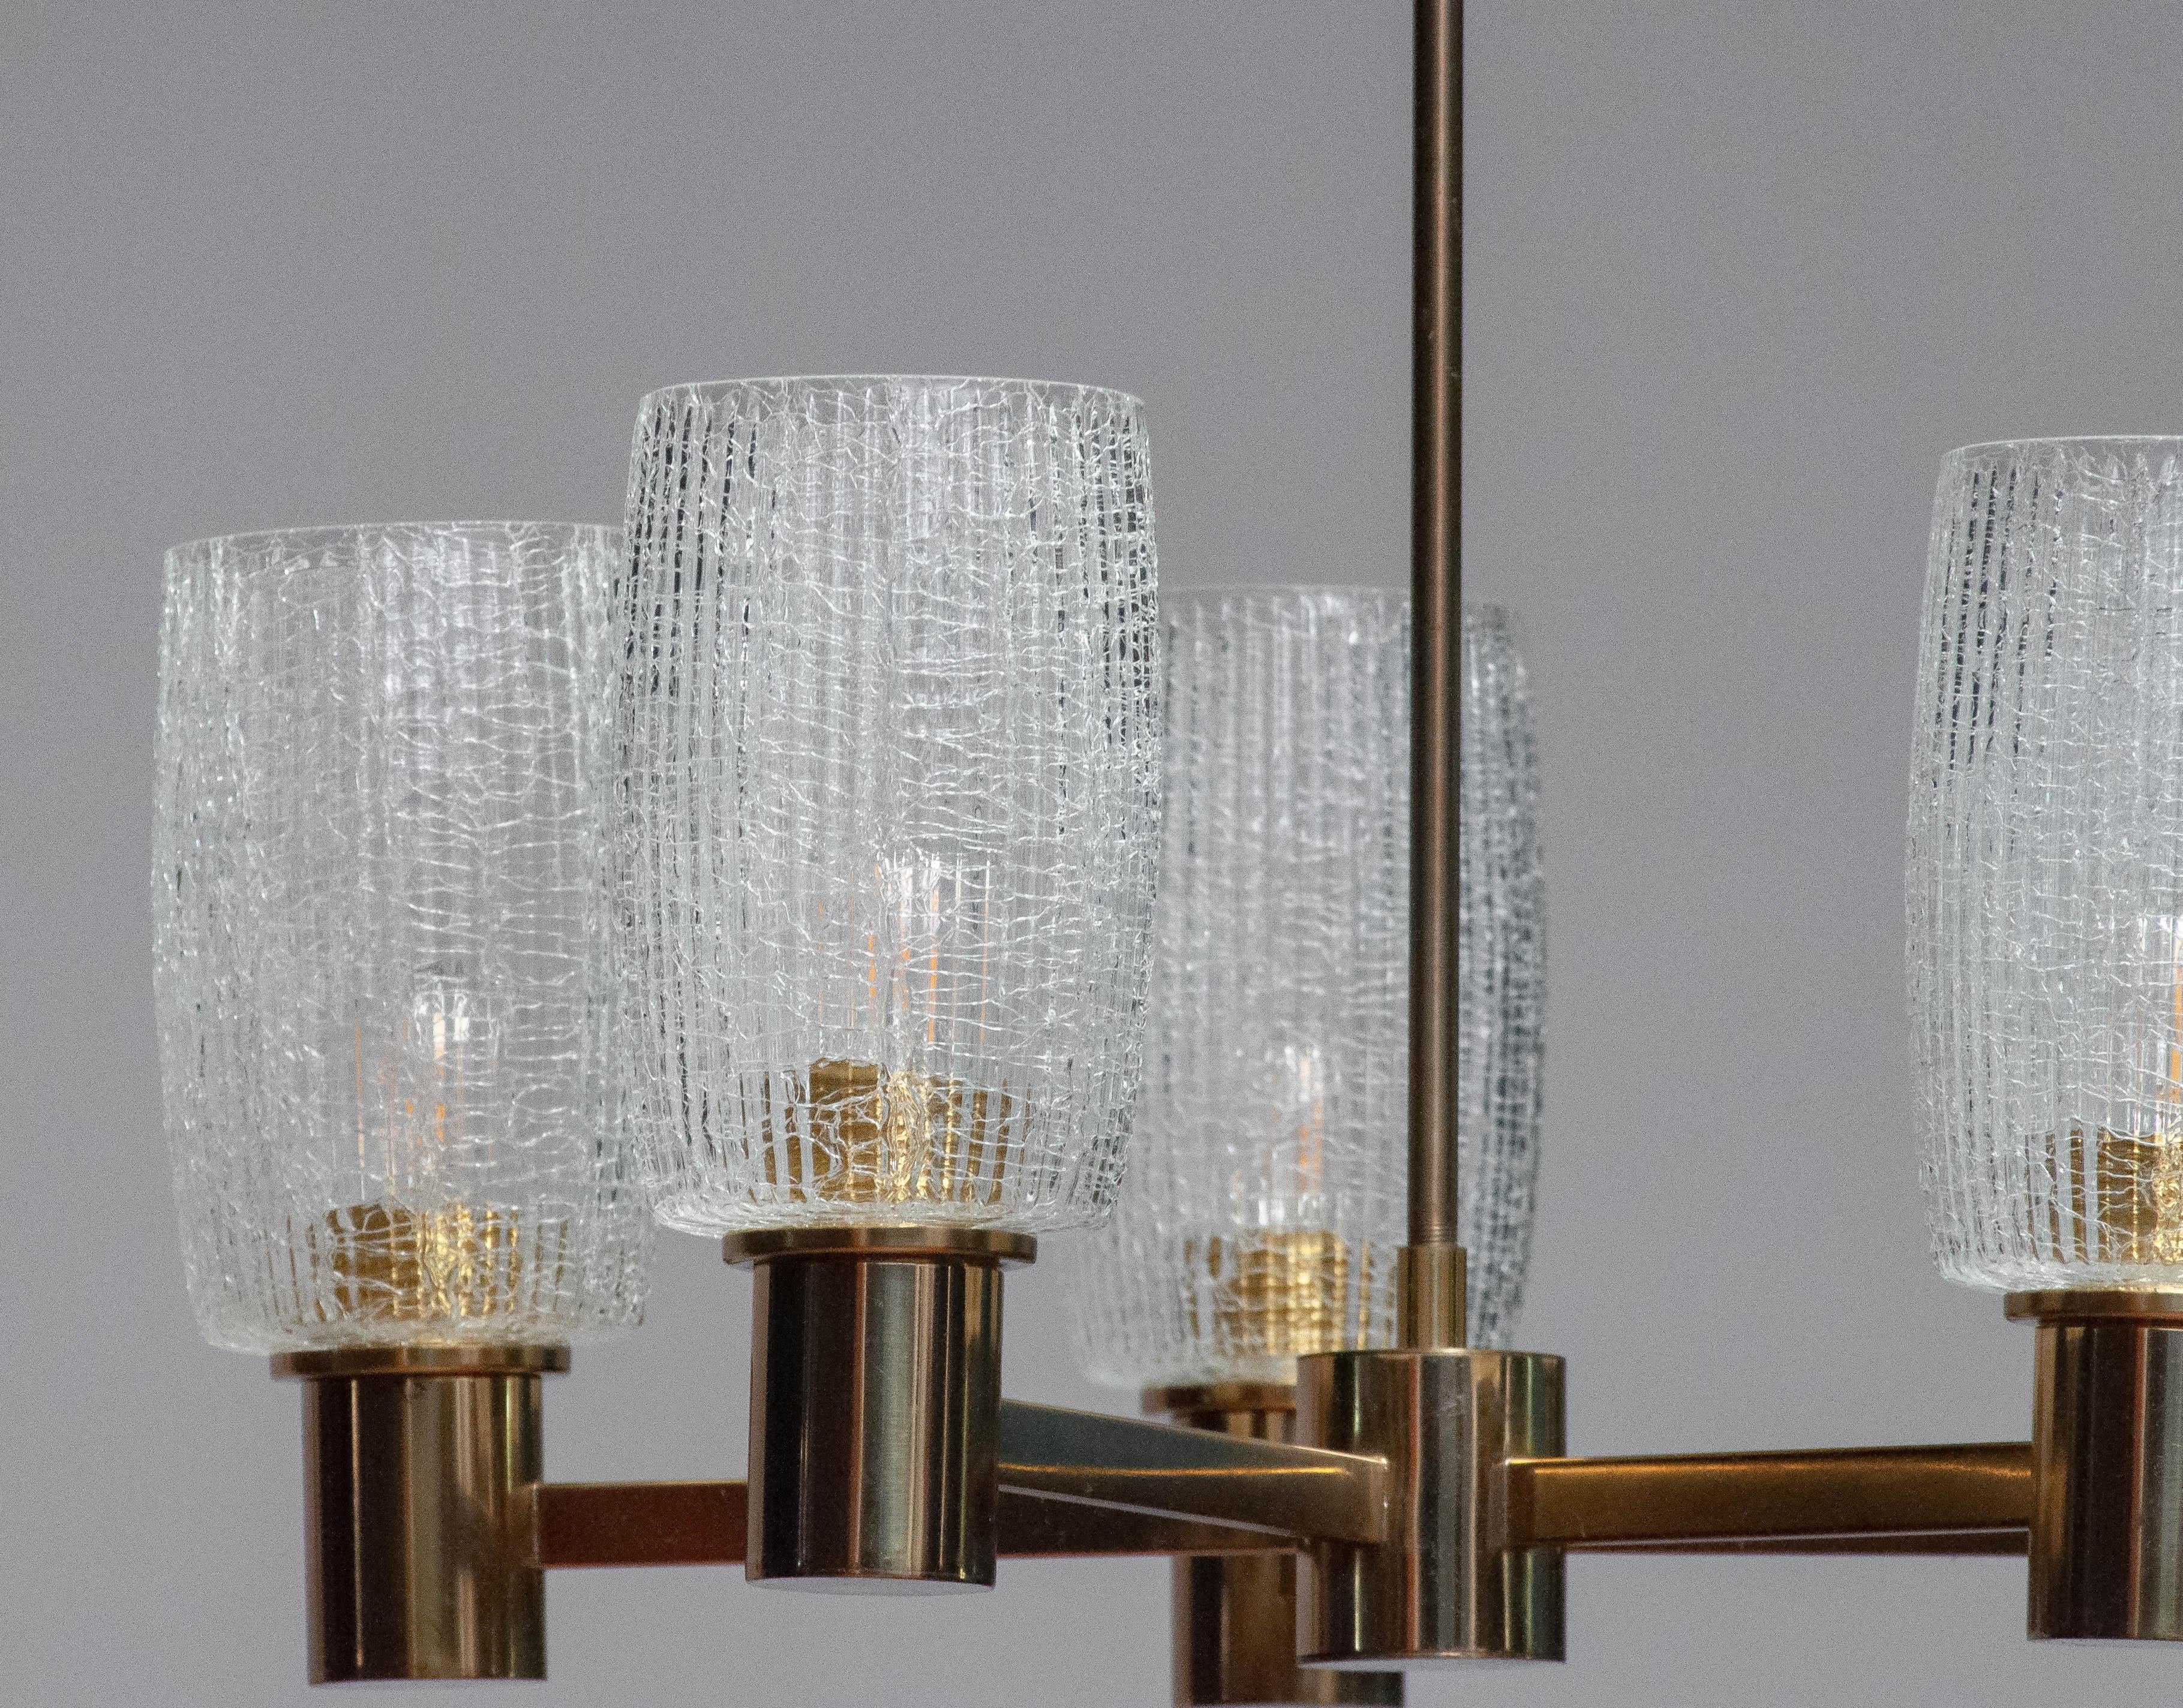 1960 Brass Chandelier With Five Large Clear Crackled Glass Vases By Doria In Good Condition For Sale In Silvolde, Gelderland